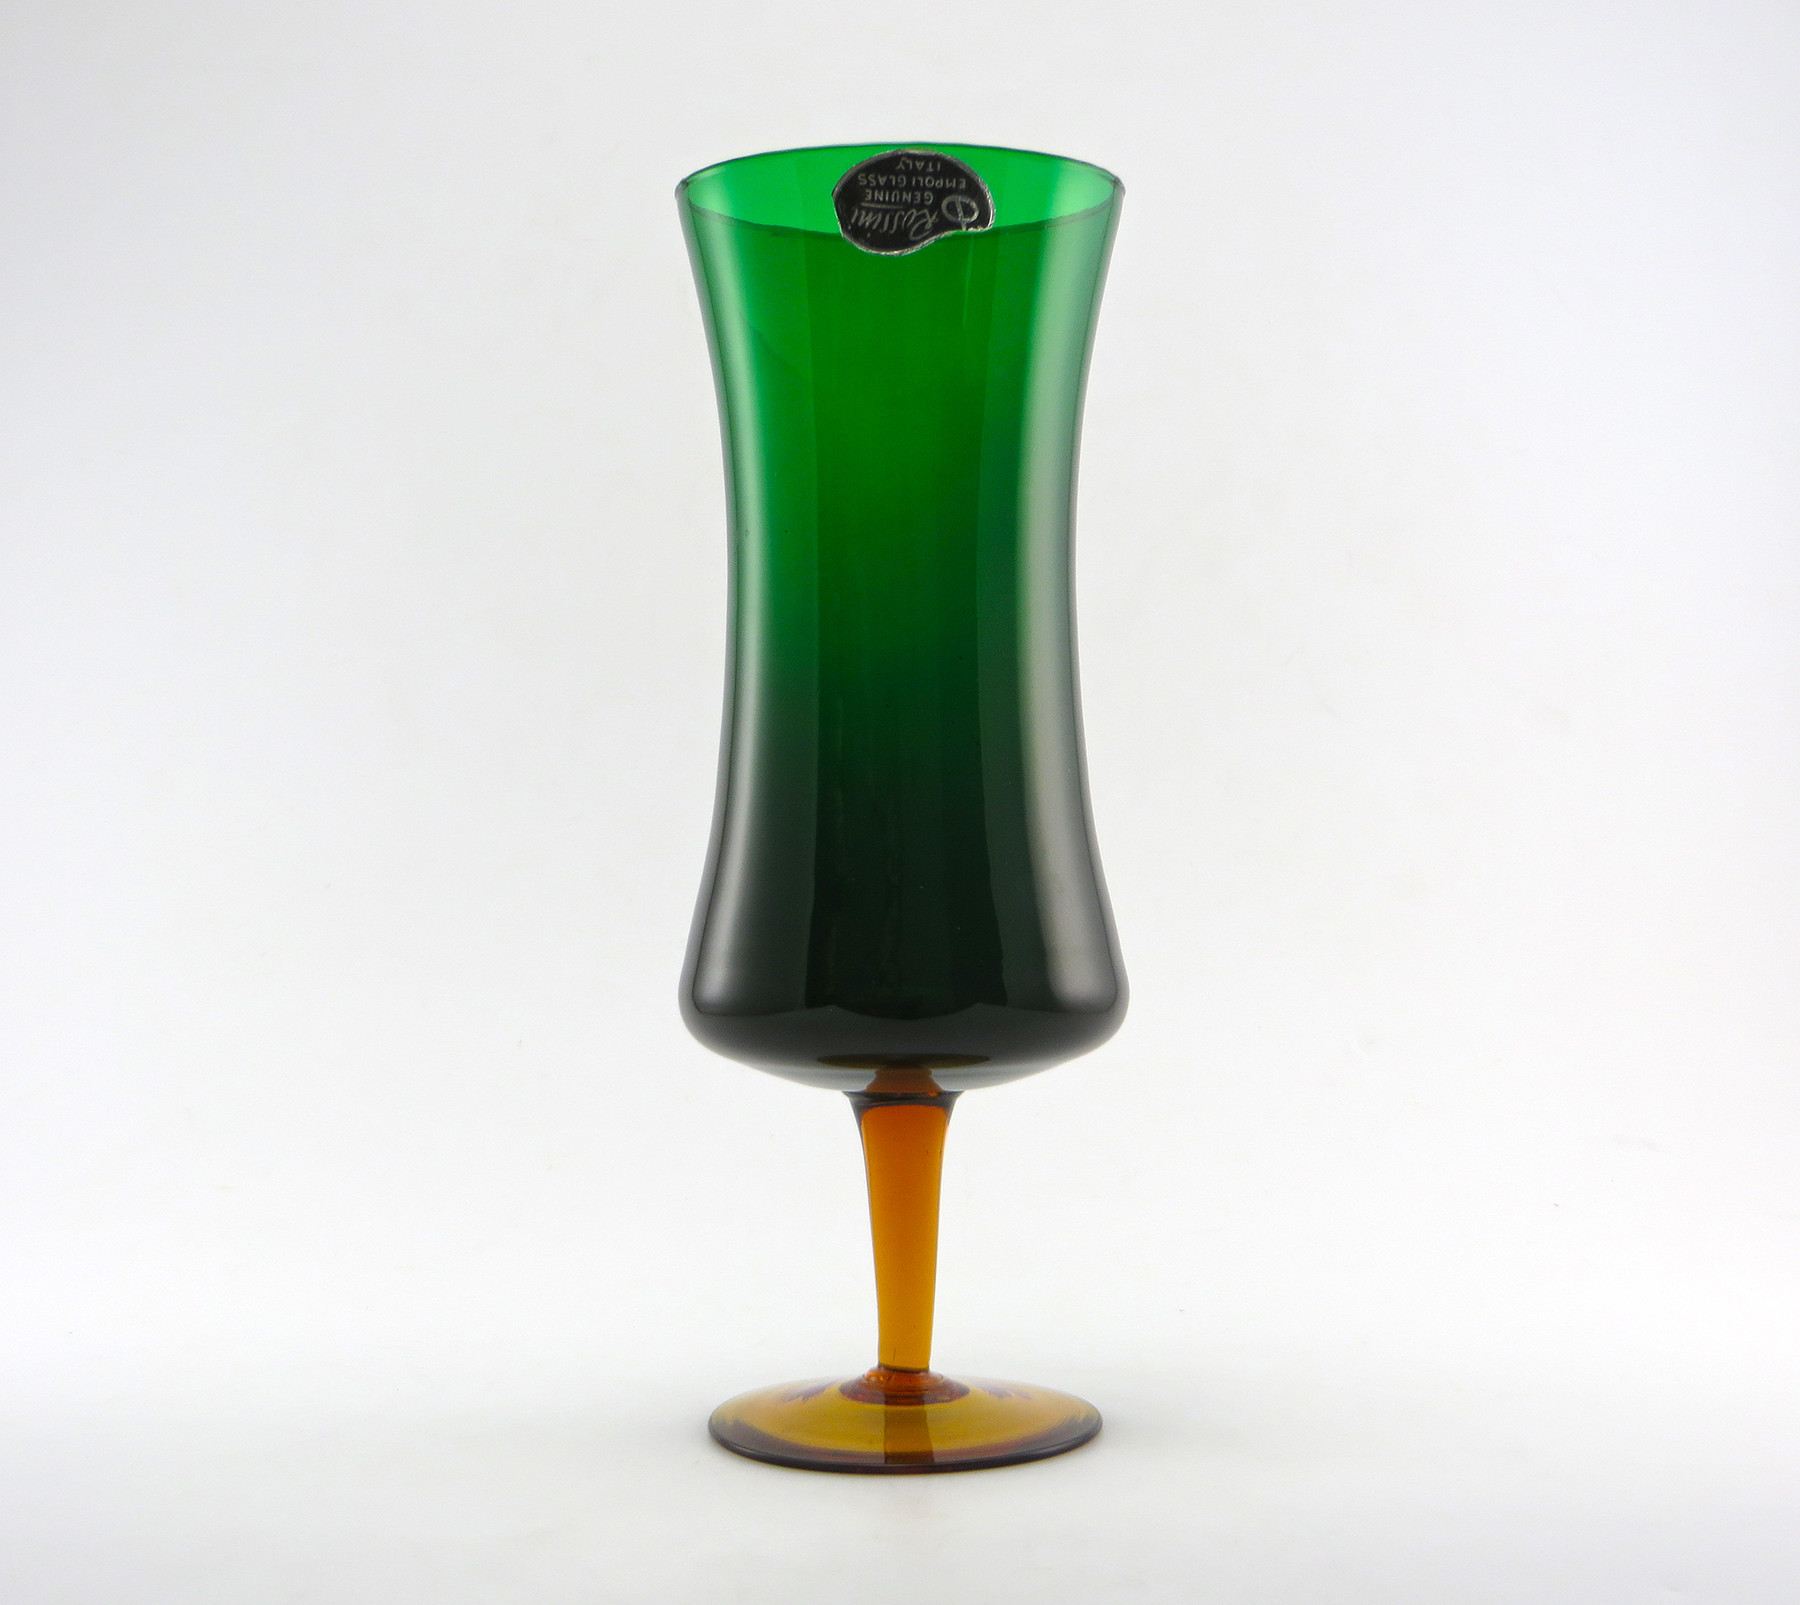 30 Perfect Large Green Glass Vase 2022 free download large green glass vase of rossini empoli art glass retro modern vase with label retro art glass pertaining to plenty of room for the stem ends at the bottom and for flowers at the top